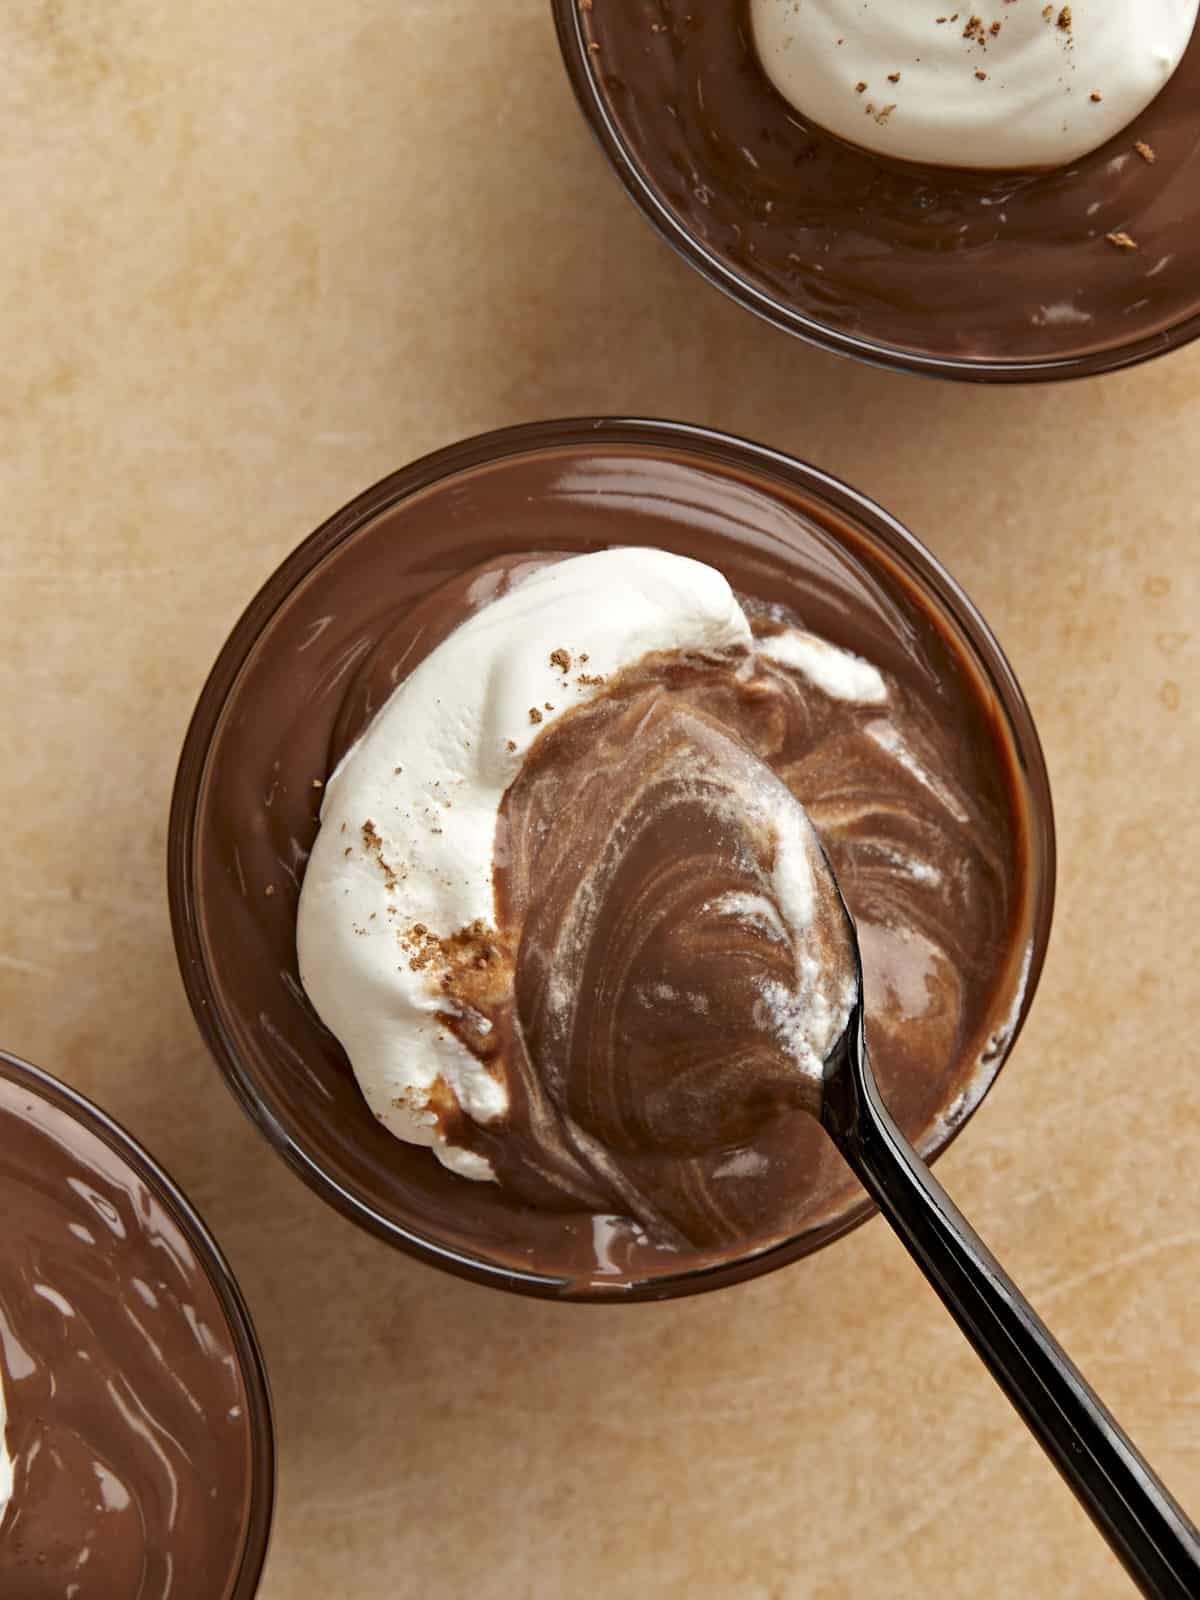 Overhead view of a bowl of chocolate pudding with whipped cream on top and a spoon stirring.